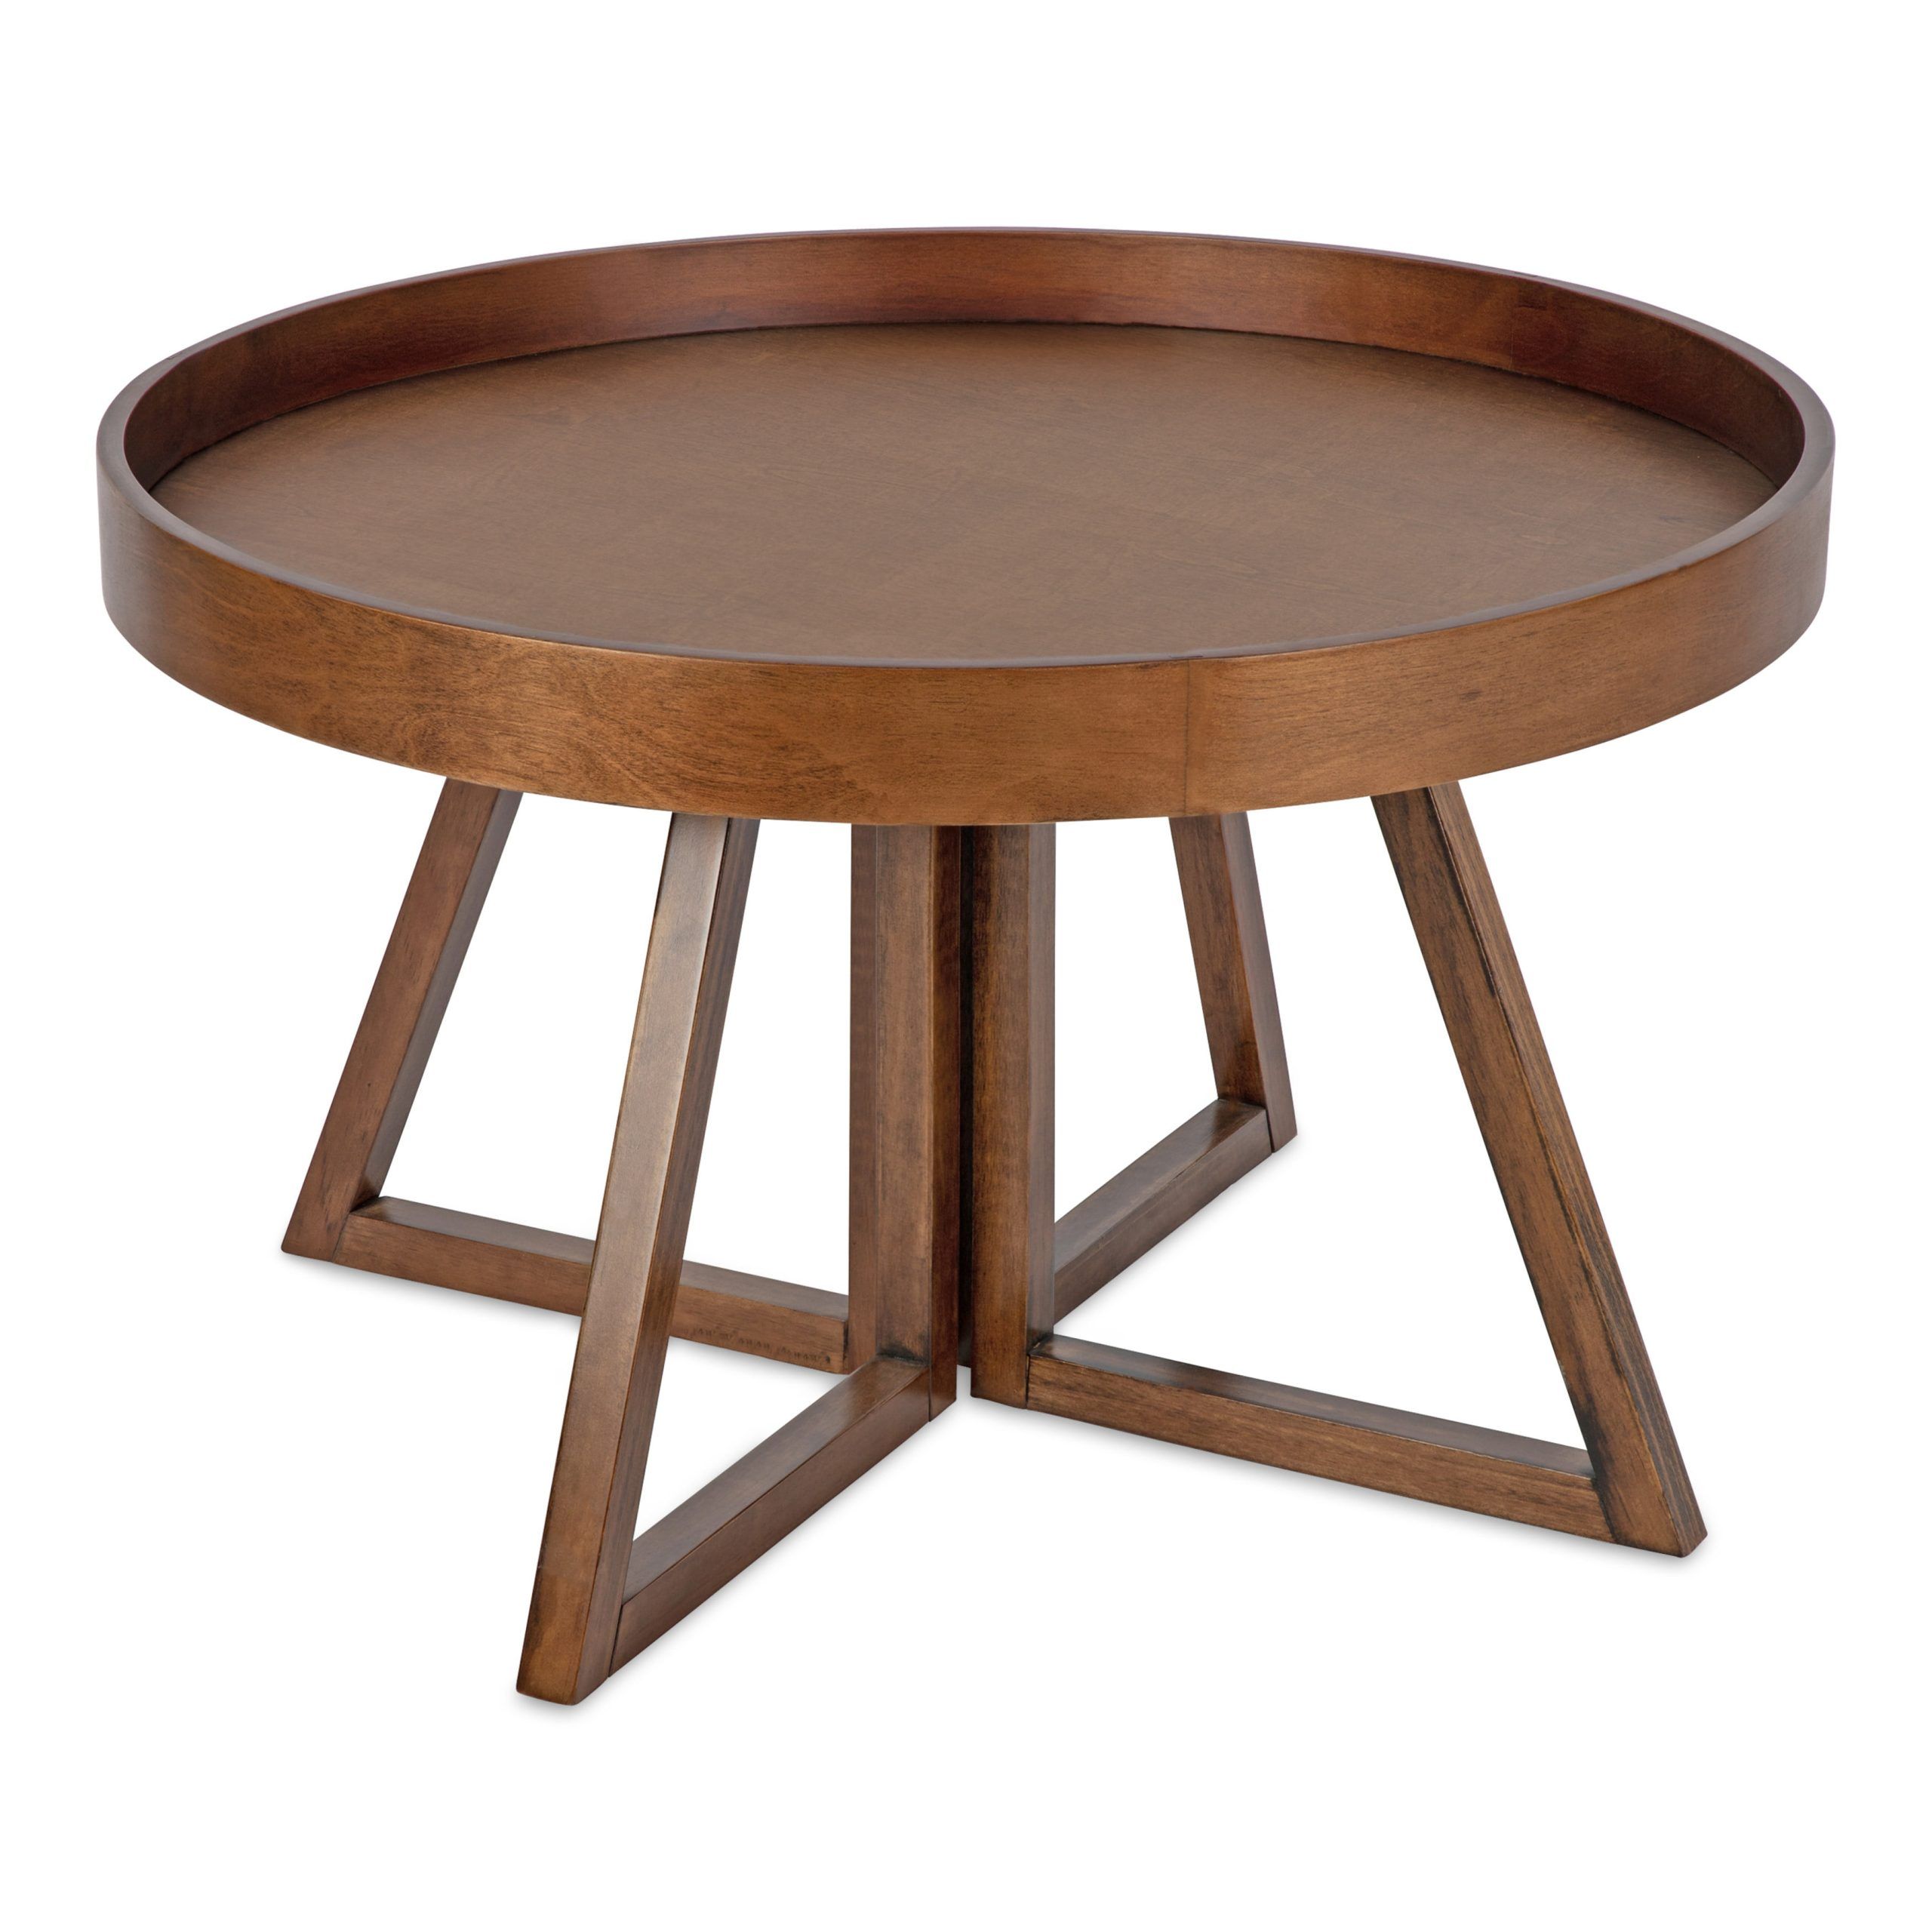 Kate And Laurel Avery Modern Round Coffee Table, 30" X 30" X 18 Intended For Round Coffee Tables (View 2 of 20)